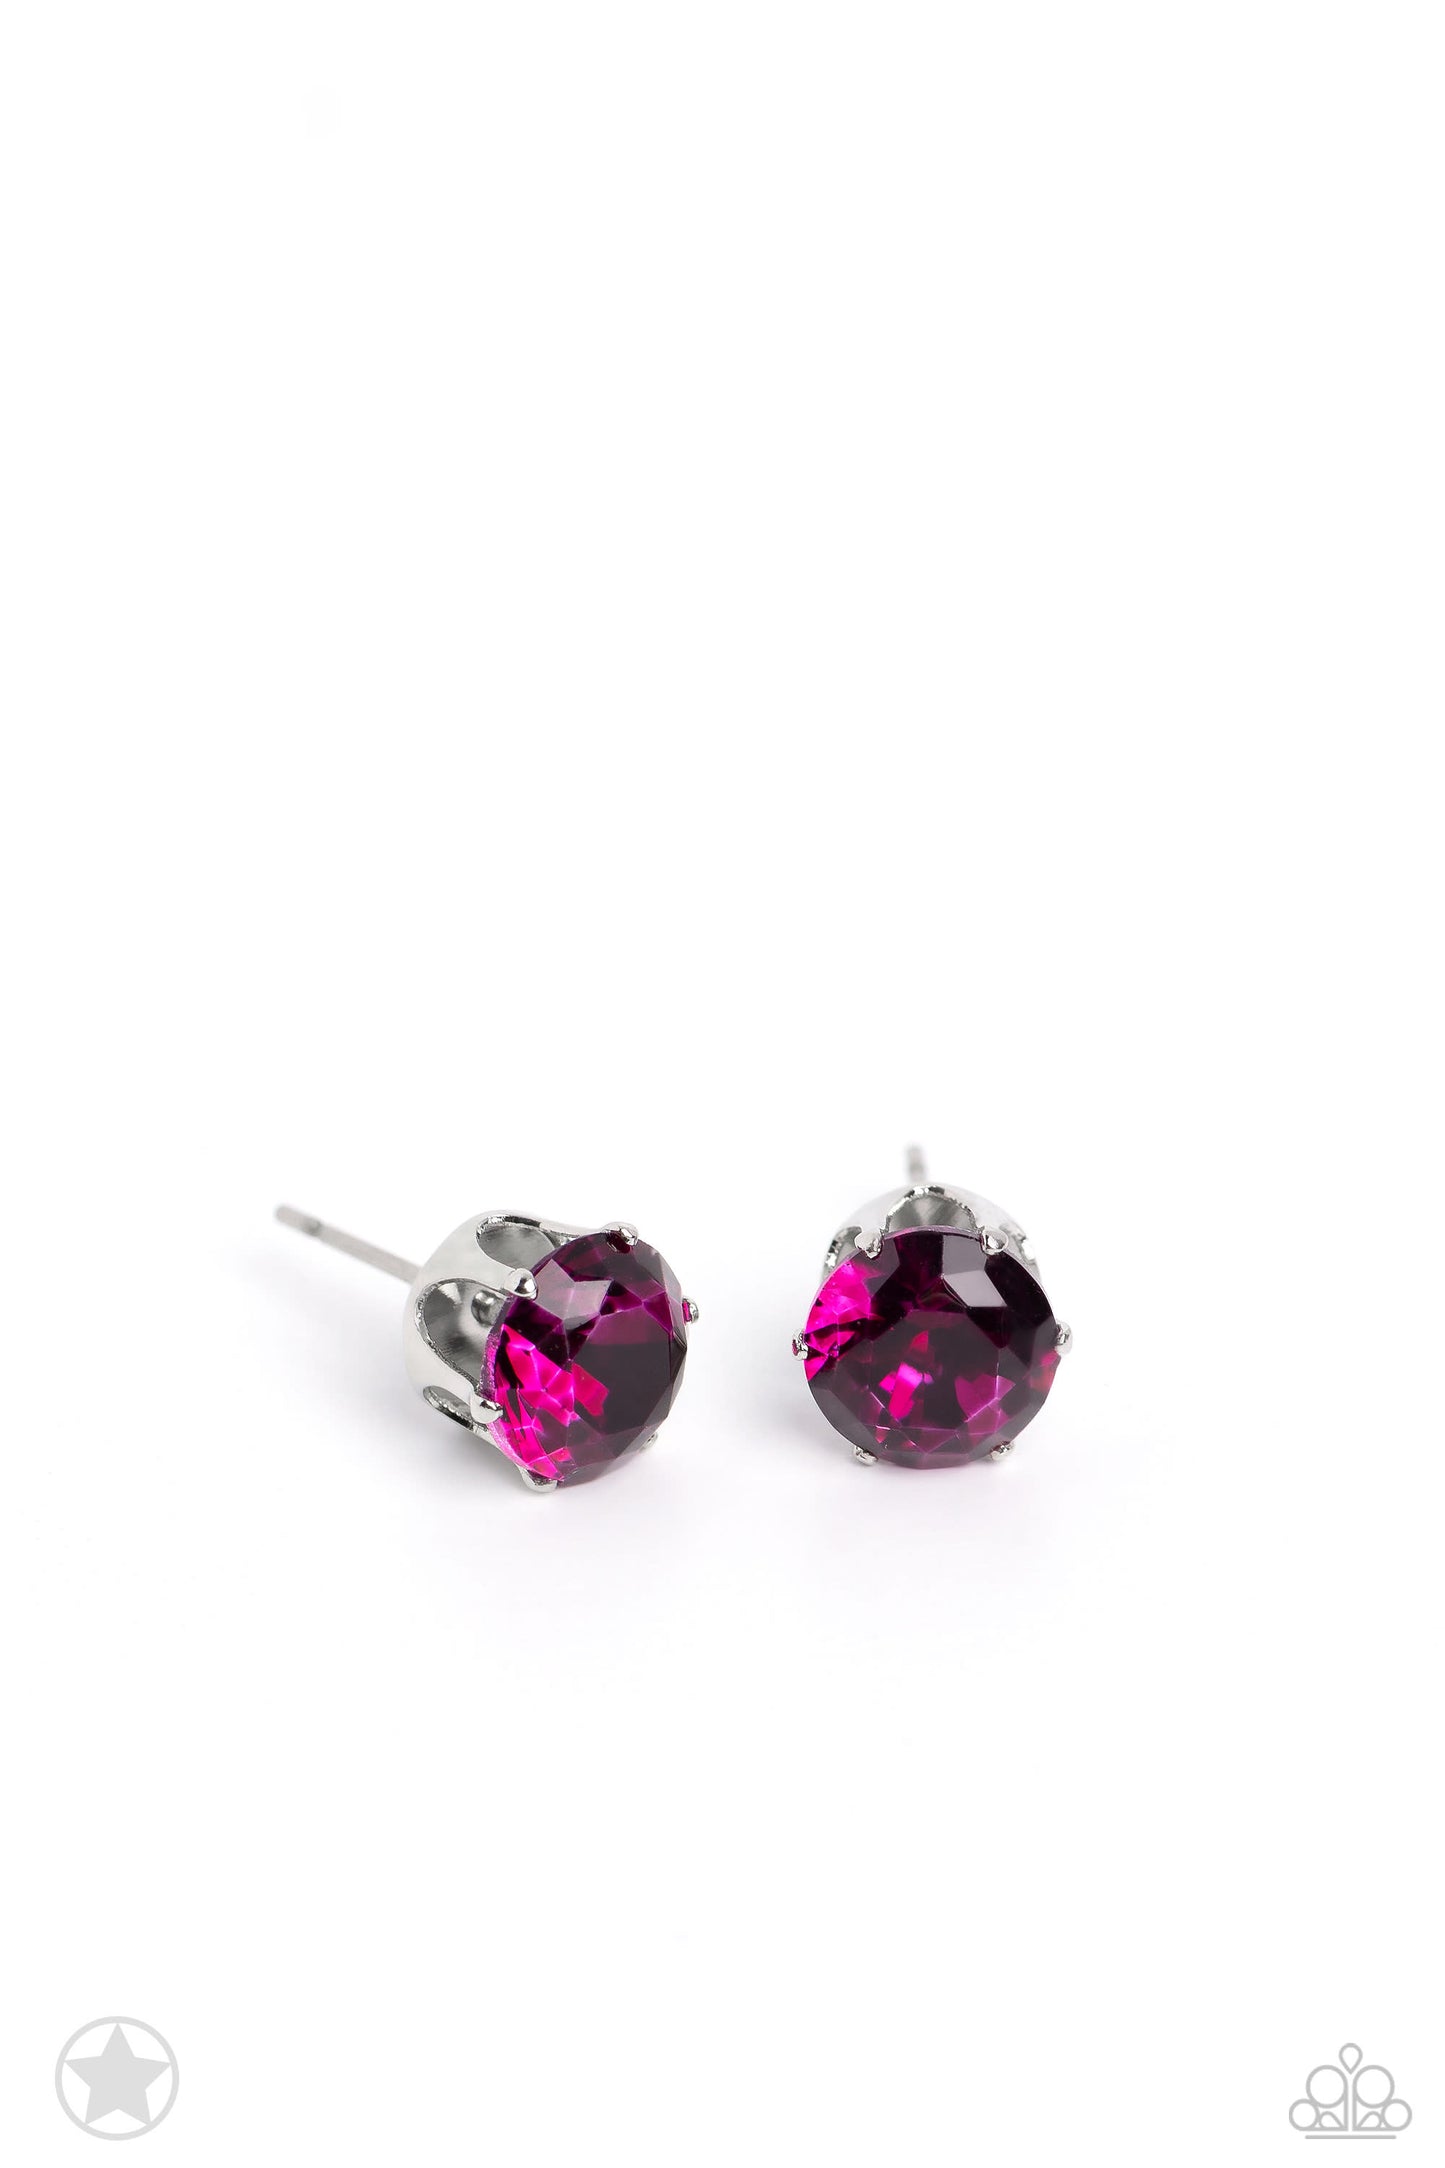 Just In TIMELESS - Pink Stud Earrings Exclusive